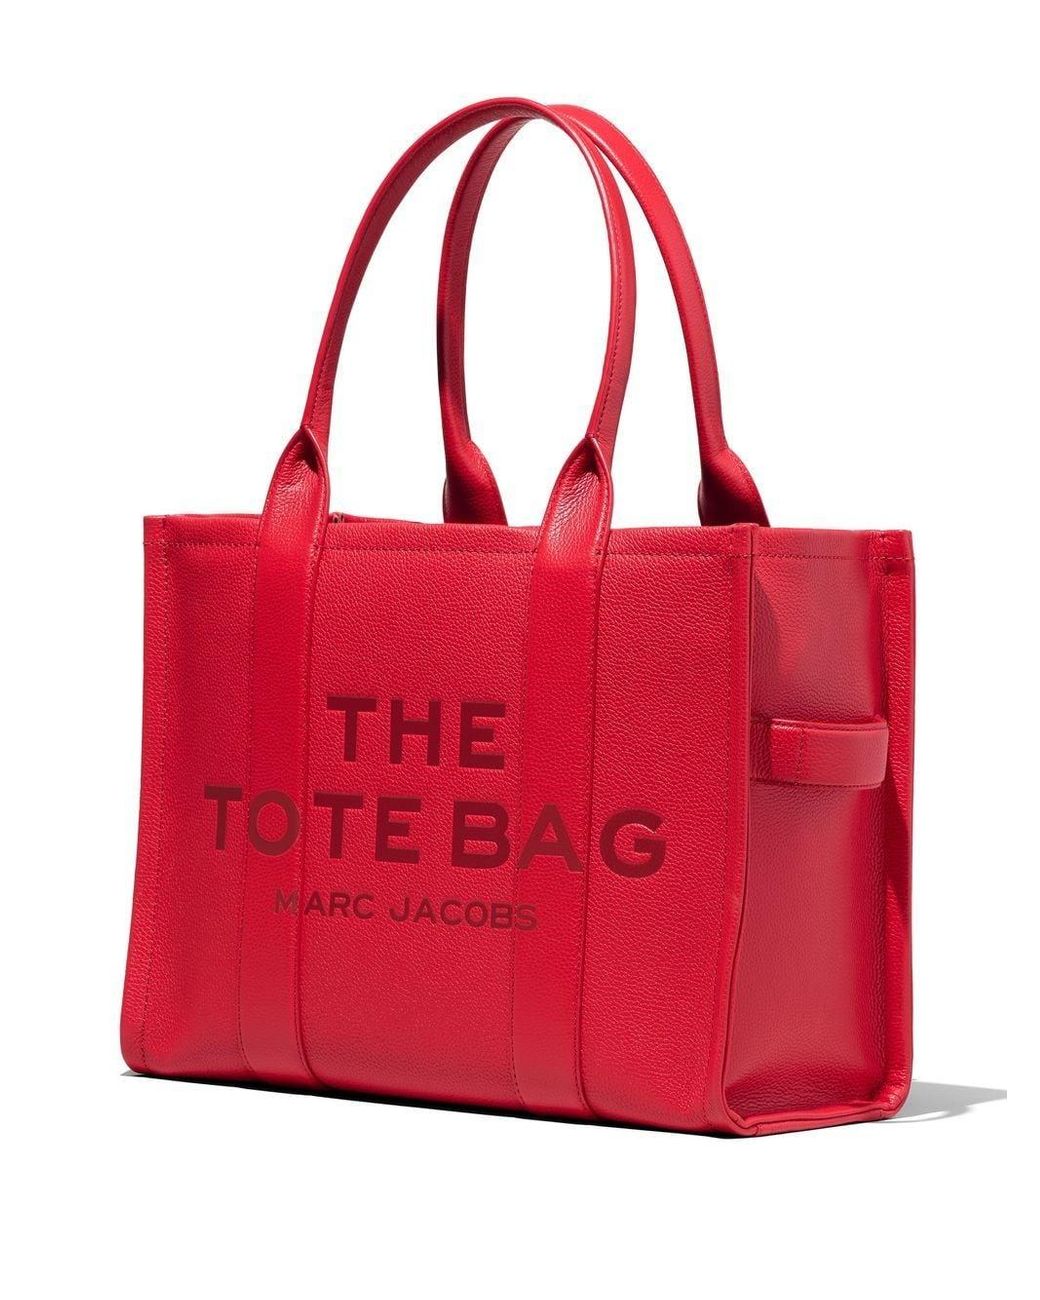 Marc Jacobs Large The Tote Bag in Red | Lyst